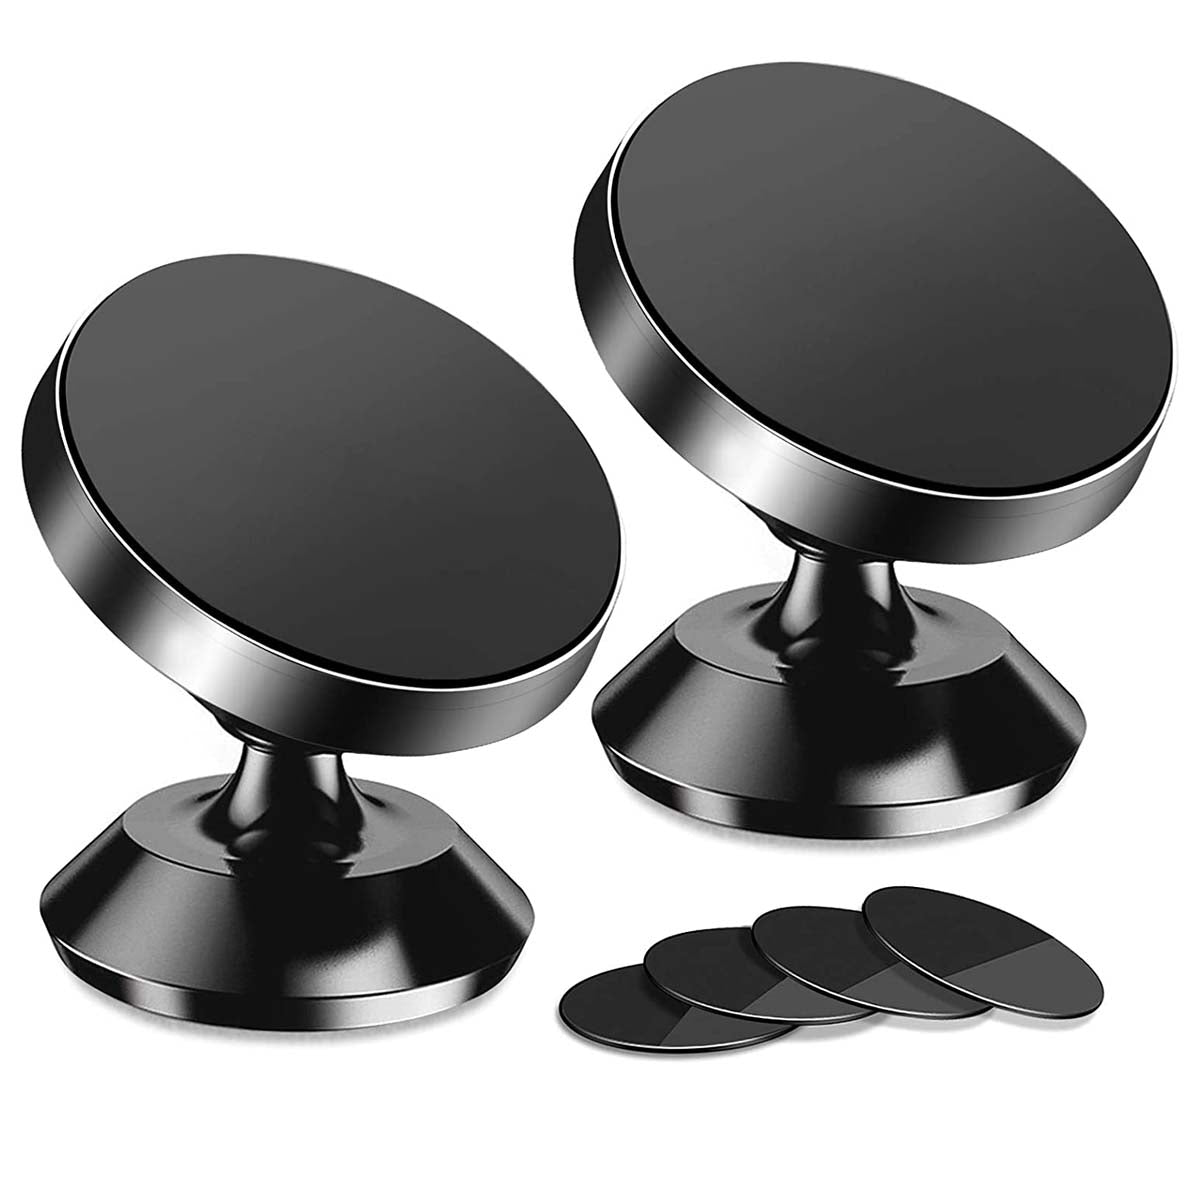 [2 Pack ] Magnetic Phone Mount, Custom For Cars, [ Super Strong Magnet ] [ with 4 Metal Plate ] car Magnetic Phone Holder, [ 360° Rotation ] Universal Dashboard car Mount Fits All Cell Phones, Car Accessories KX13982